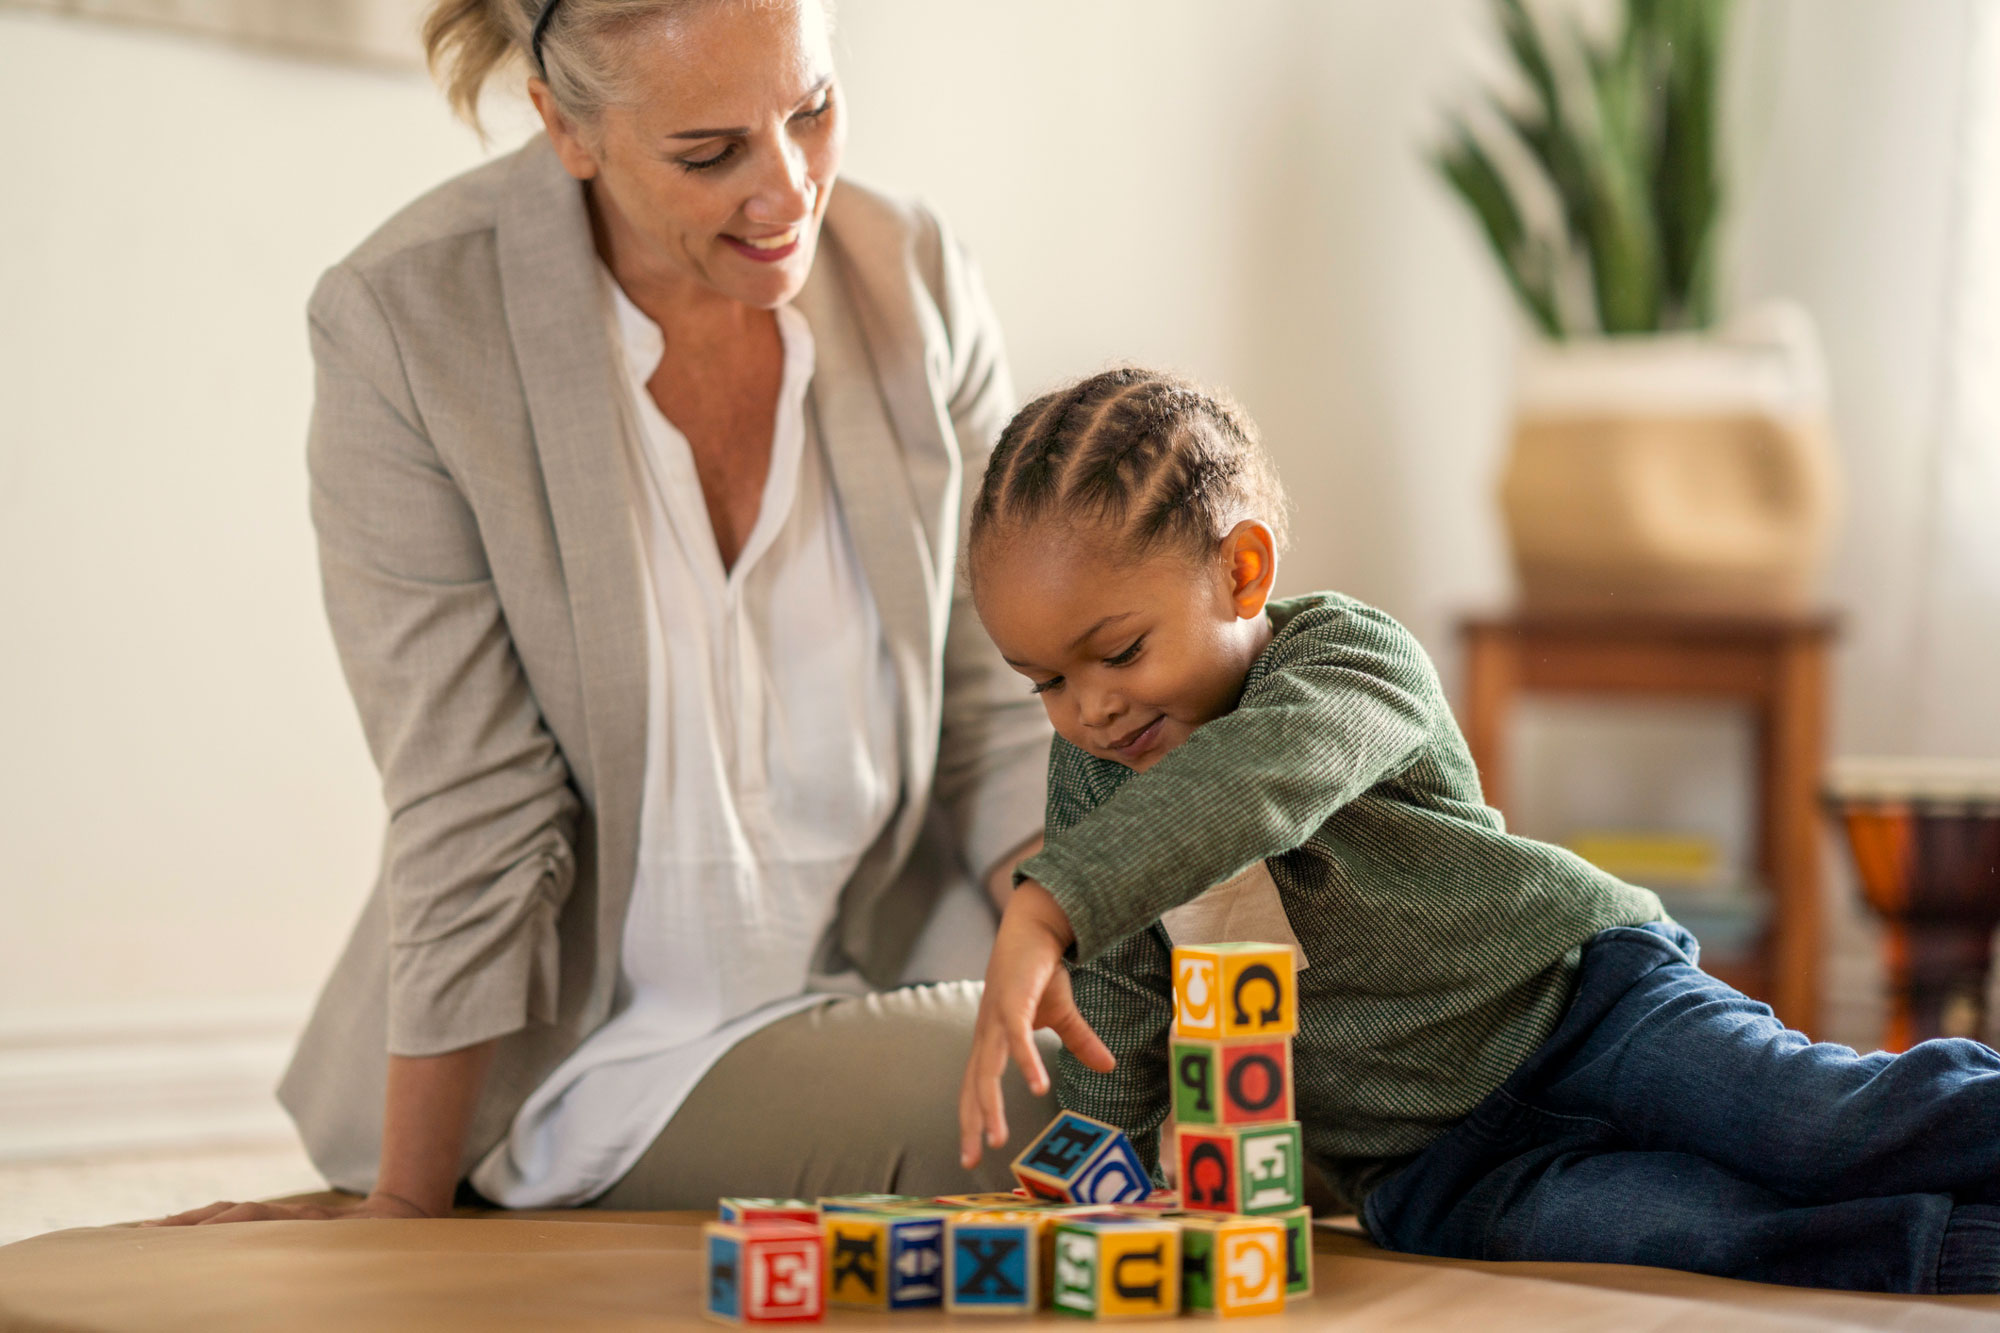 A woman observing a toddler playing with blocks